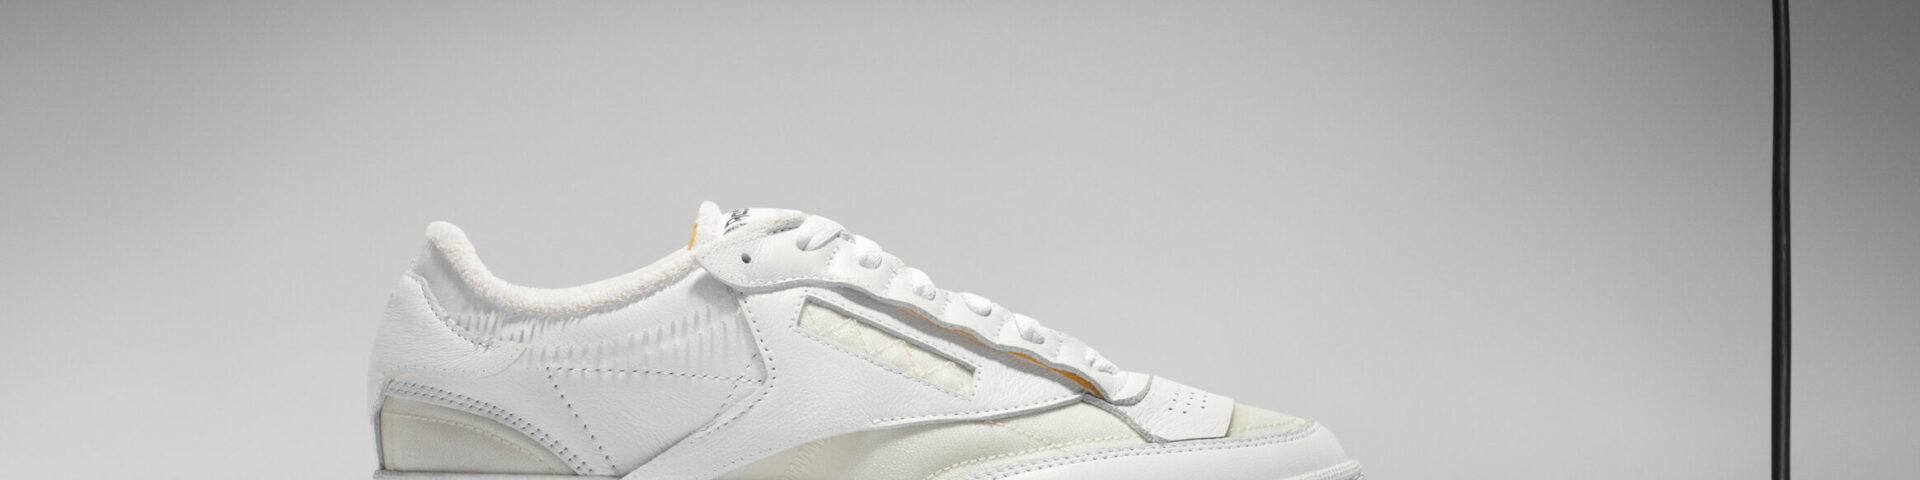 Maison Margiela and Reebok release two new styles: the Classic Leather ...